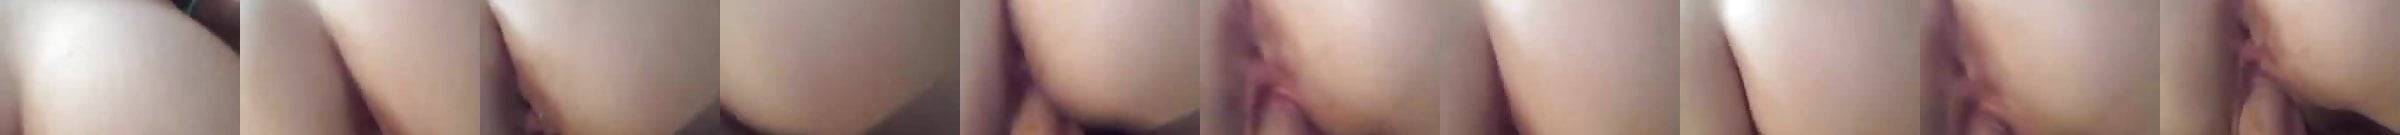 POV Reverse Cowgirl With PAWG Free Gaping Porn Video 91 XHamster